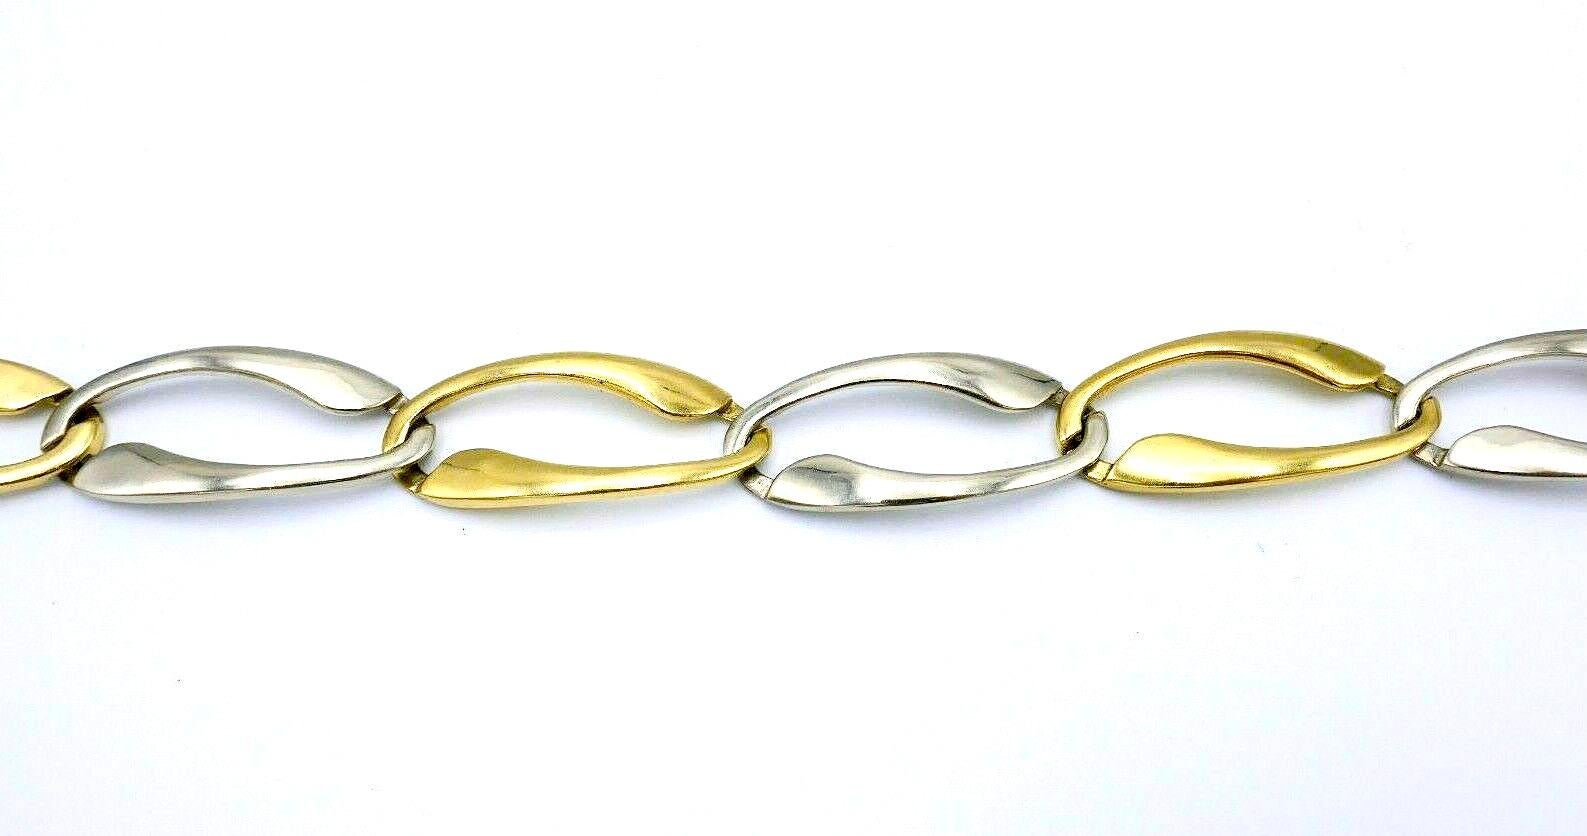 Simple yet beautiful vintage link bracelet made of 18k yellow and white polished gold. Stamped with a hallmark  for 18k gold.
Measurements: 8